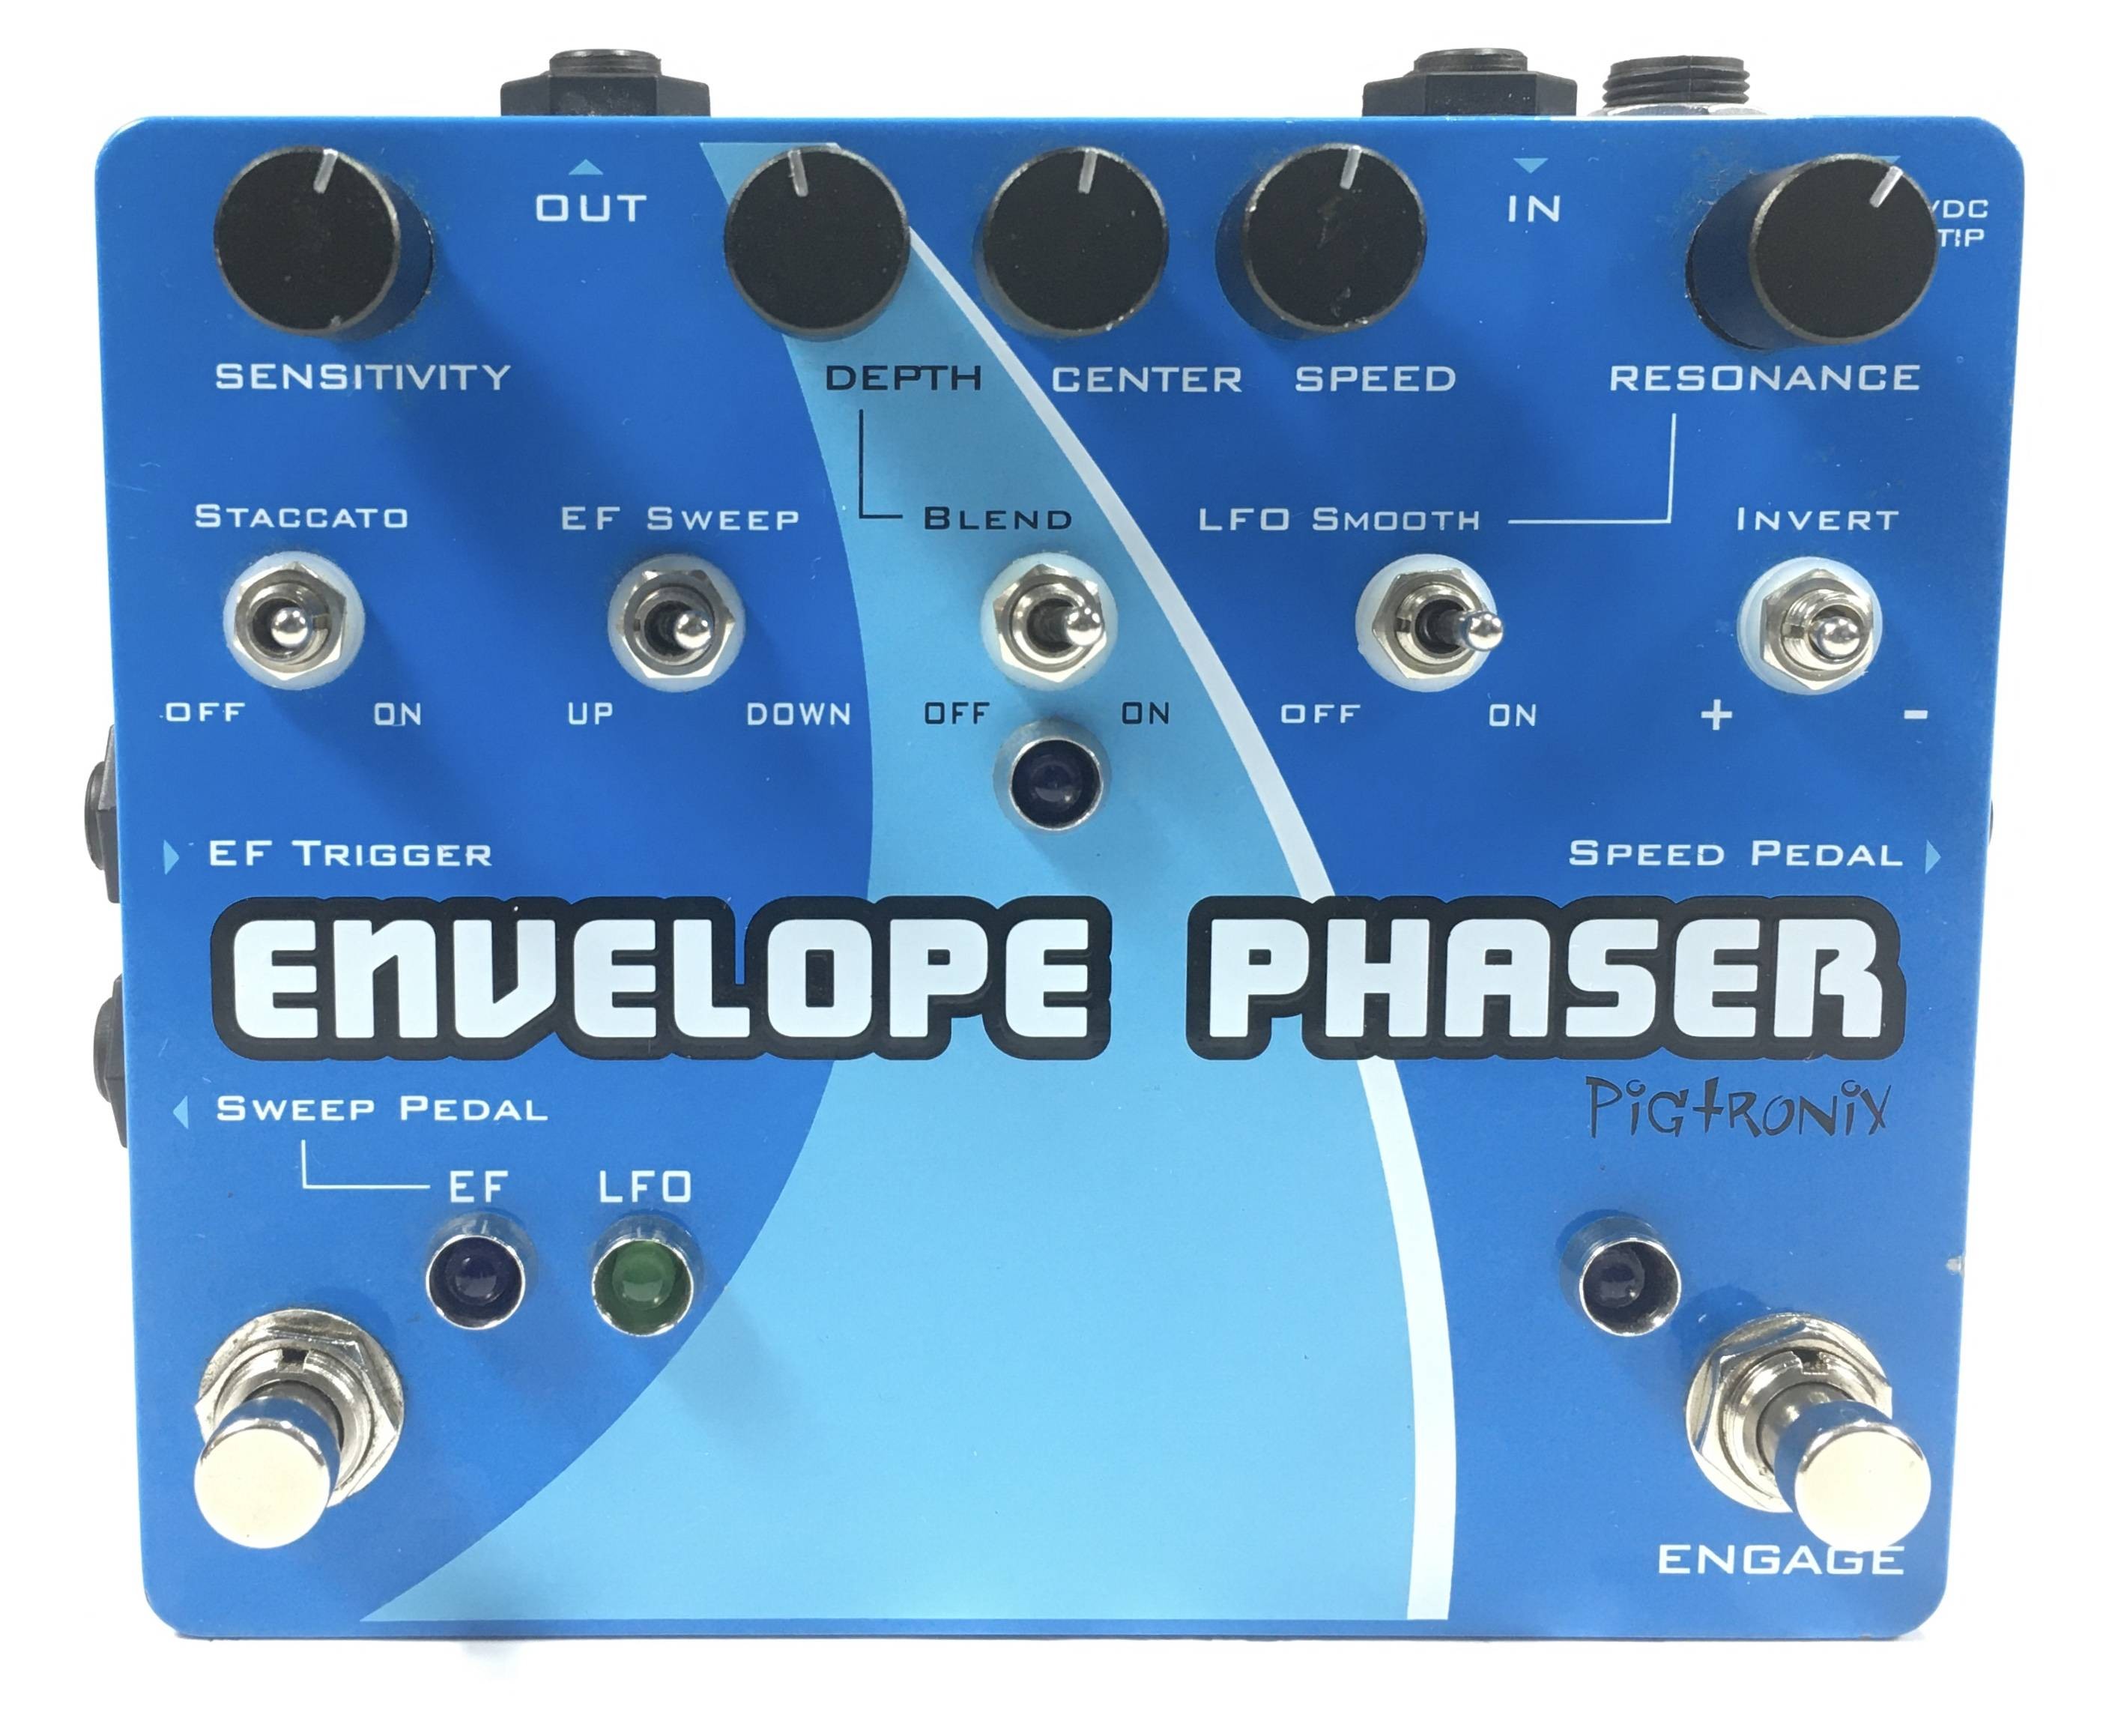 Pigtronix EP2 Envelope Phaser | paymentsway.co